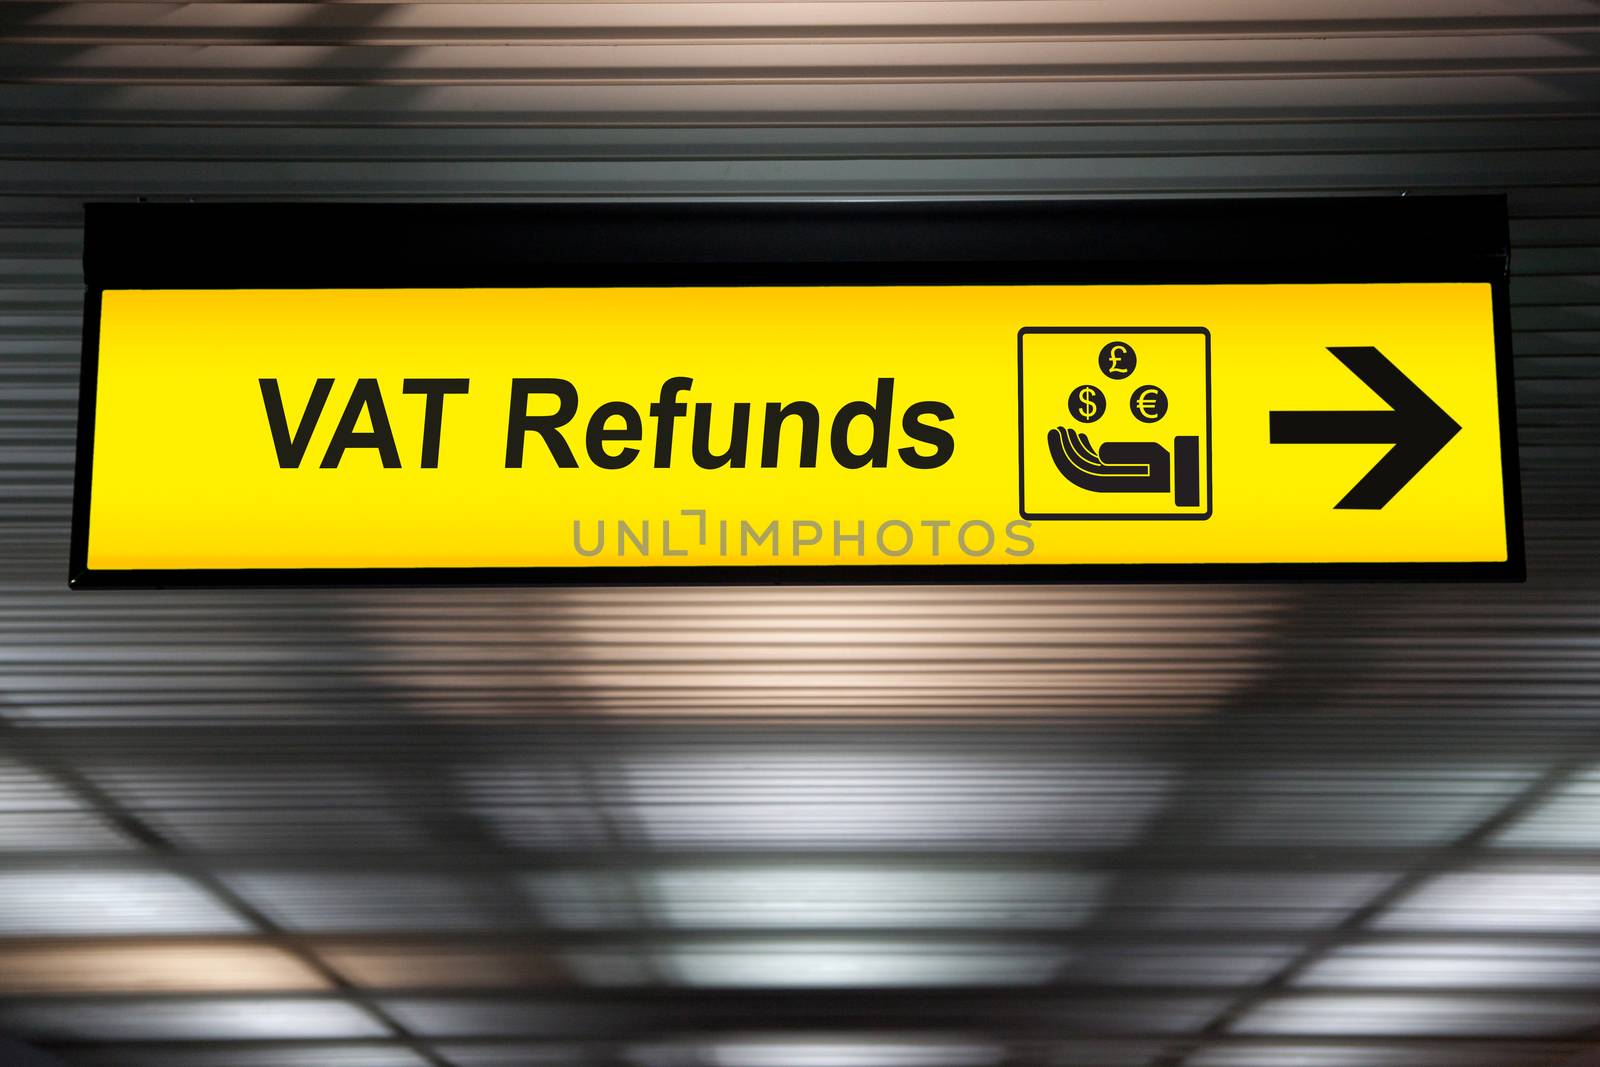 Airport Tax refund and customs sign in terminal at airport by asiandelight